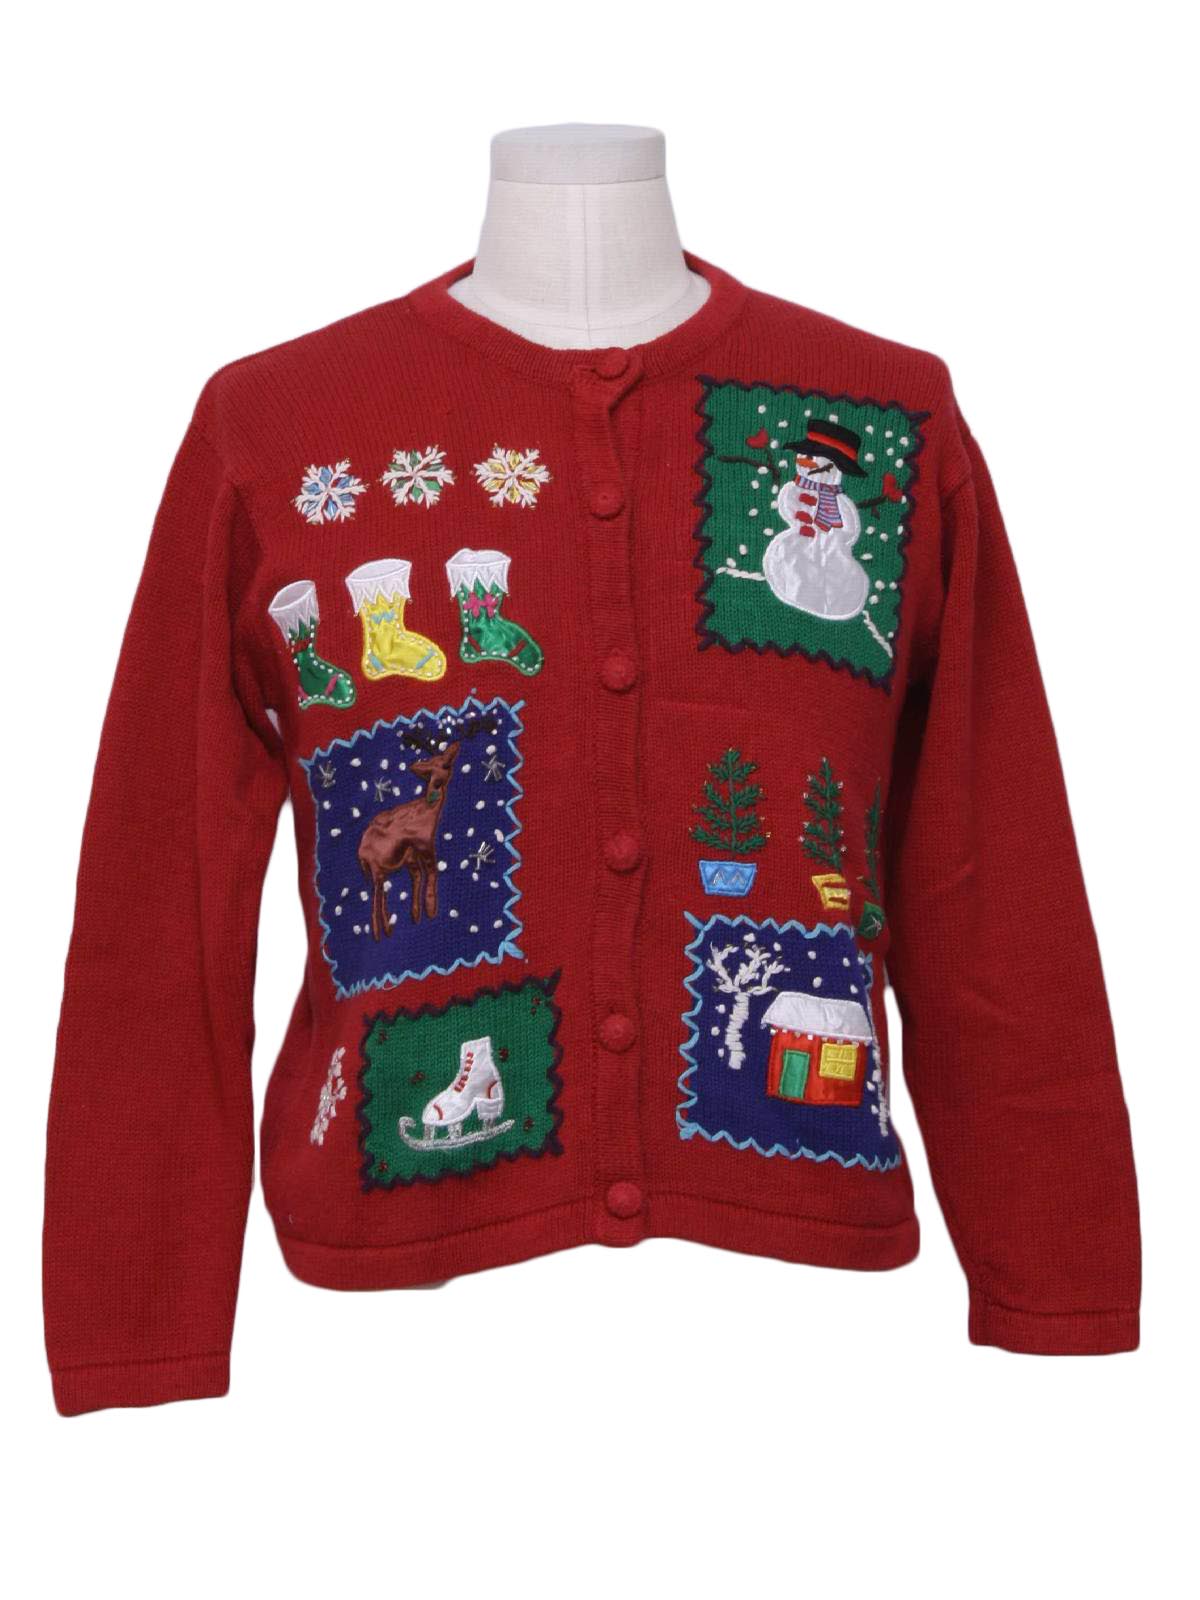 Womens Ugly Christmas Sweater: -In Resource- Womens red, button front ...